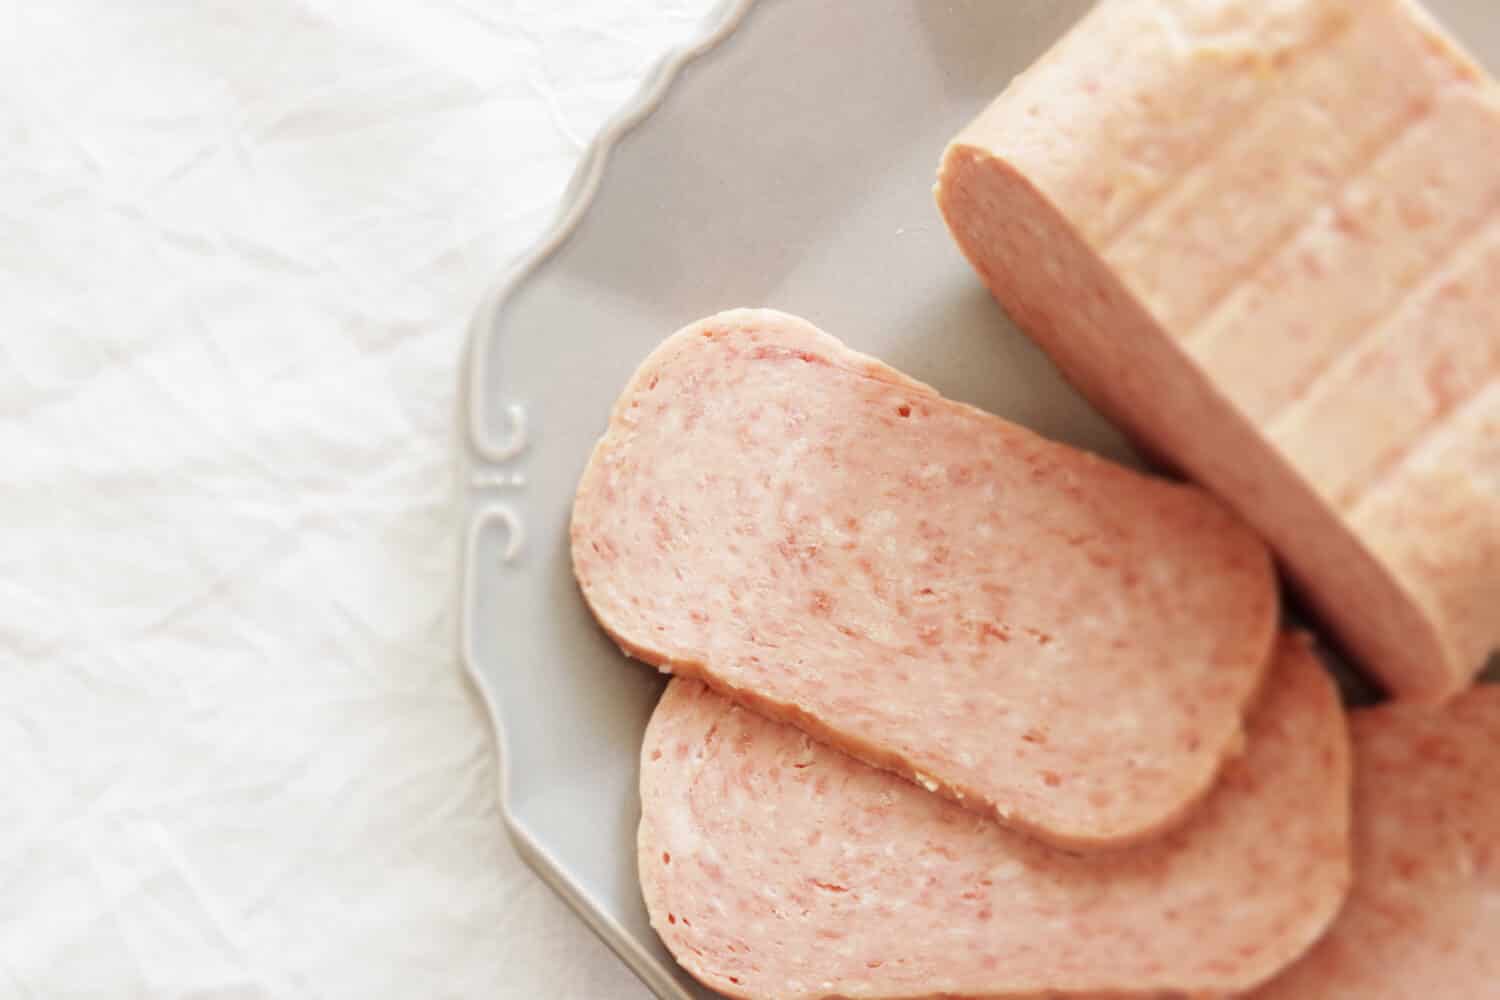 Spam Nutrition: Is It Healthy or Bad for You?